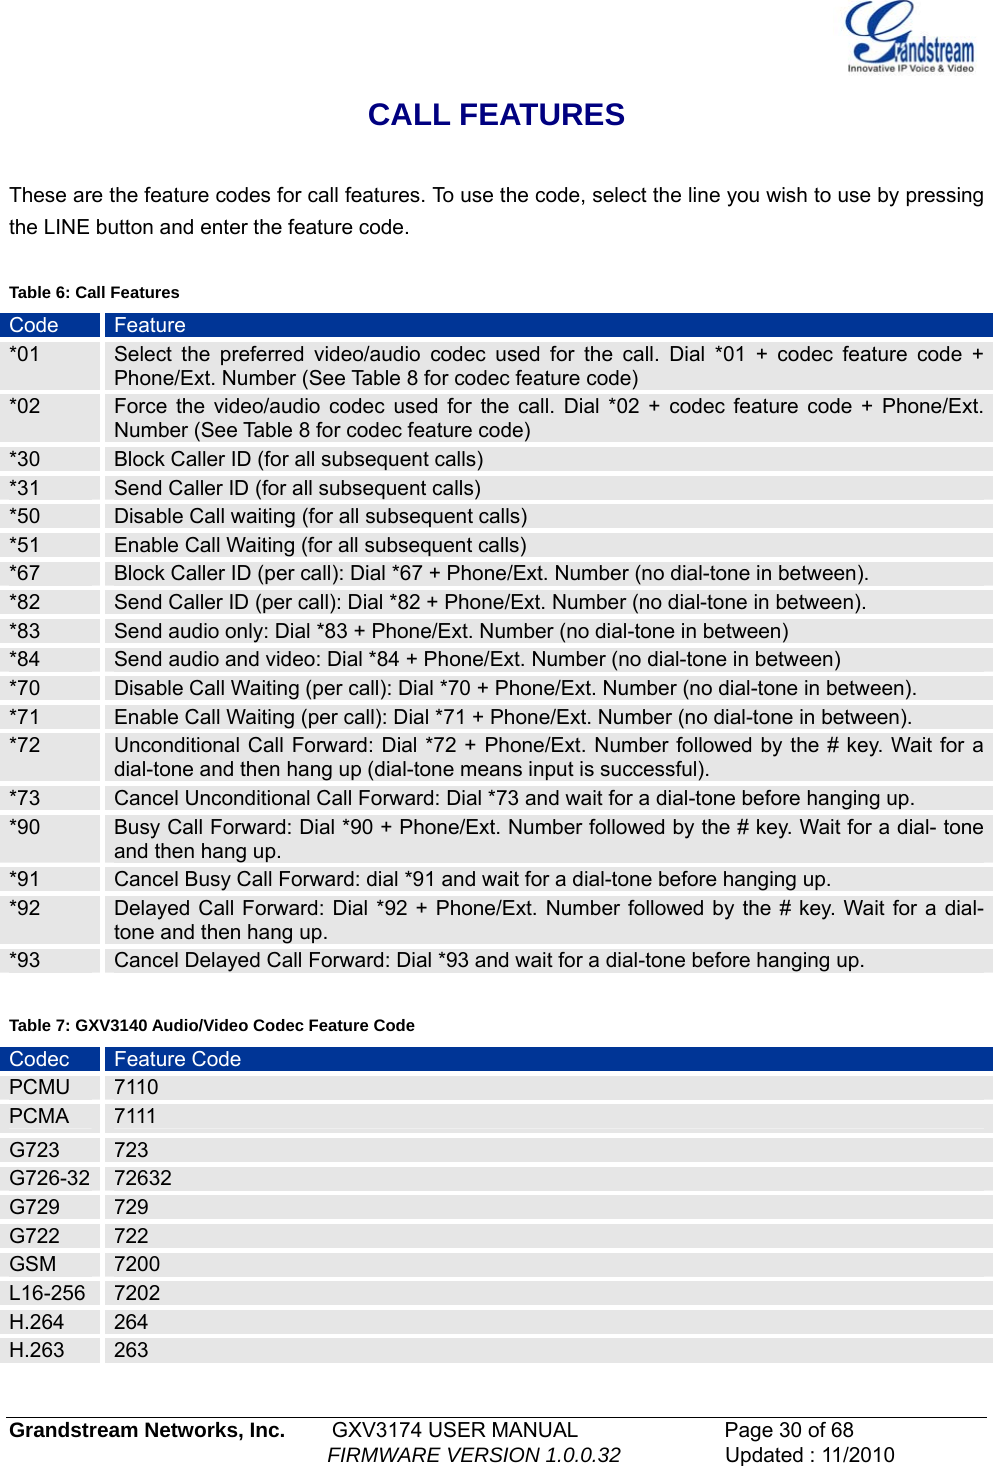   Grandstream Networks, Inc.        GXV3174 USER MANUAL                      Page 30 of 68                                                        FIRMWARE VERSION 1.0.0.32                  Updated : 11/2010  CALL FEATURES  These are the feature codes for call features. To use the code, select the line you wish to use by pressing the LINE button and enter the feature code.  Table 6: Call Features Code  Feature *01  Select the preferred video/audio codec used for the call. Dial *01 + codec feature code + Phone/Ext. Number (See Table 8 for codec feature code)  *02  Force the video/audio codec used for the call. Dial *02 + codec feature code + Phone/Ext. Number (See Table 8 for codec feature code) *30  Block Caller ID (for all subsequent calls) *31  Send Caller ID (for all subsequent calls) *50  Disable Call waiting (for all subsequent calls) *51  Enable Call Waiting (for all subsequent calls) *67  Block Caller ID (per call): Dial *67 + Phone/Ext. Number (no dial-tone in between). *82  Send Caller ID (per call): Dial *82 + Phone/Ext. Number (no dial-tone in between). *83  Send audio only: Dial *83 + Phone/Ext. Number (no dial-tone in between) *84  Send audio and video: Dial *84 + Phone/Ext. Number (no dial-tone in between)  *70  Disable Call Waiting (per call): Dial *70 + Phone/Ext. Number (no dial-tone in between). *71  Enable Call Waiting (per call): Dial *71 + Phone/Ext. Number (no dial-tone in between). *72  Unconditional Call Forward: Dial *72 + Phone/Ext. Number followed by the # key. Wait for a dial-tone and then hang up (dial-tone means input is successful). *73  Cancel Unconditional Call Forward: Dial *73 and wait for a dial-tone before hanging up. *90  Busy Call Forward: Dial *90 + Phone/Ext. Number followed by the # key. Wait for a dial- tone and then hang up. *91  Cancel Busy Call Forward: dial *91 and wait for a dial-tone before hanging up. *92  Delayed Call Forward: Dial *92 + Phone/Ext. Number followed by the # key. Wait for a dial-tone and then hang up. *93  Cancel Delayed Call Forward: Dial *93 and wait for a dial-tone before hanging up.  Table 7: GXV3140 Audio/Video Codec Feature Code Codec  Feature Code  PCMU  7110 PCMA  7111  G723  723 G726-32  72632 G729  729 G722  722 GSM  7200 L16-256  7202 H.264  264 H.263  263 